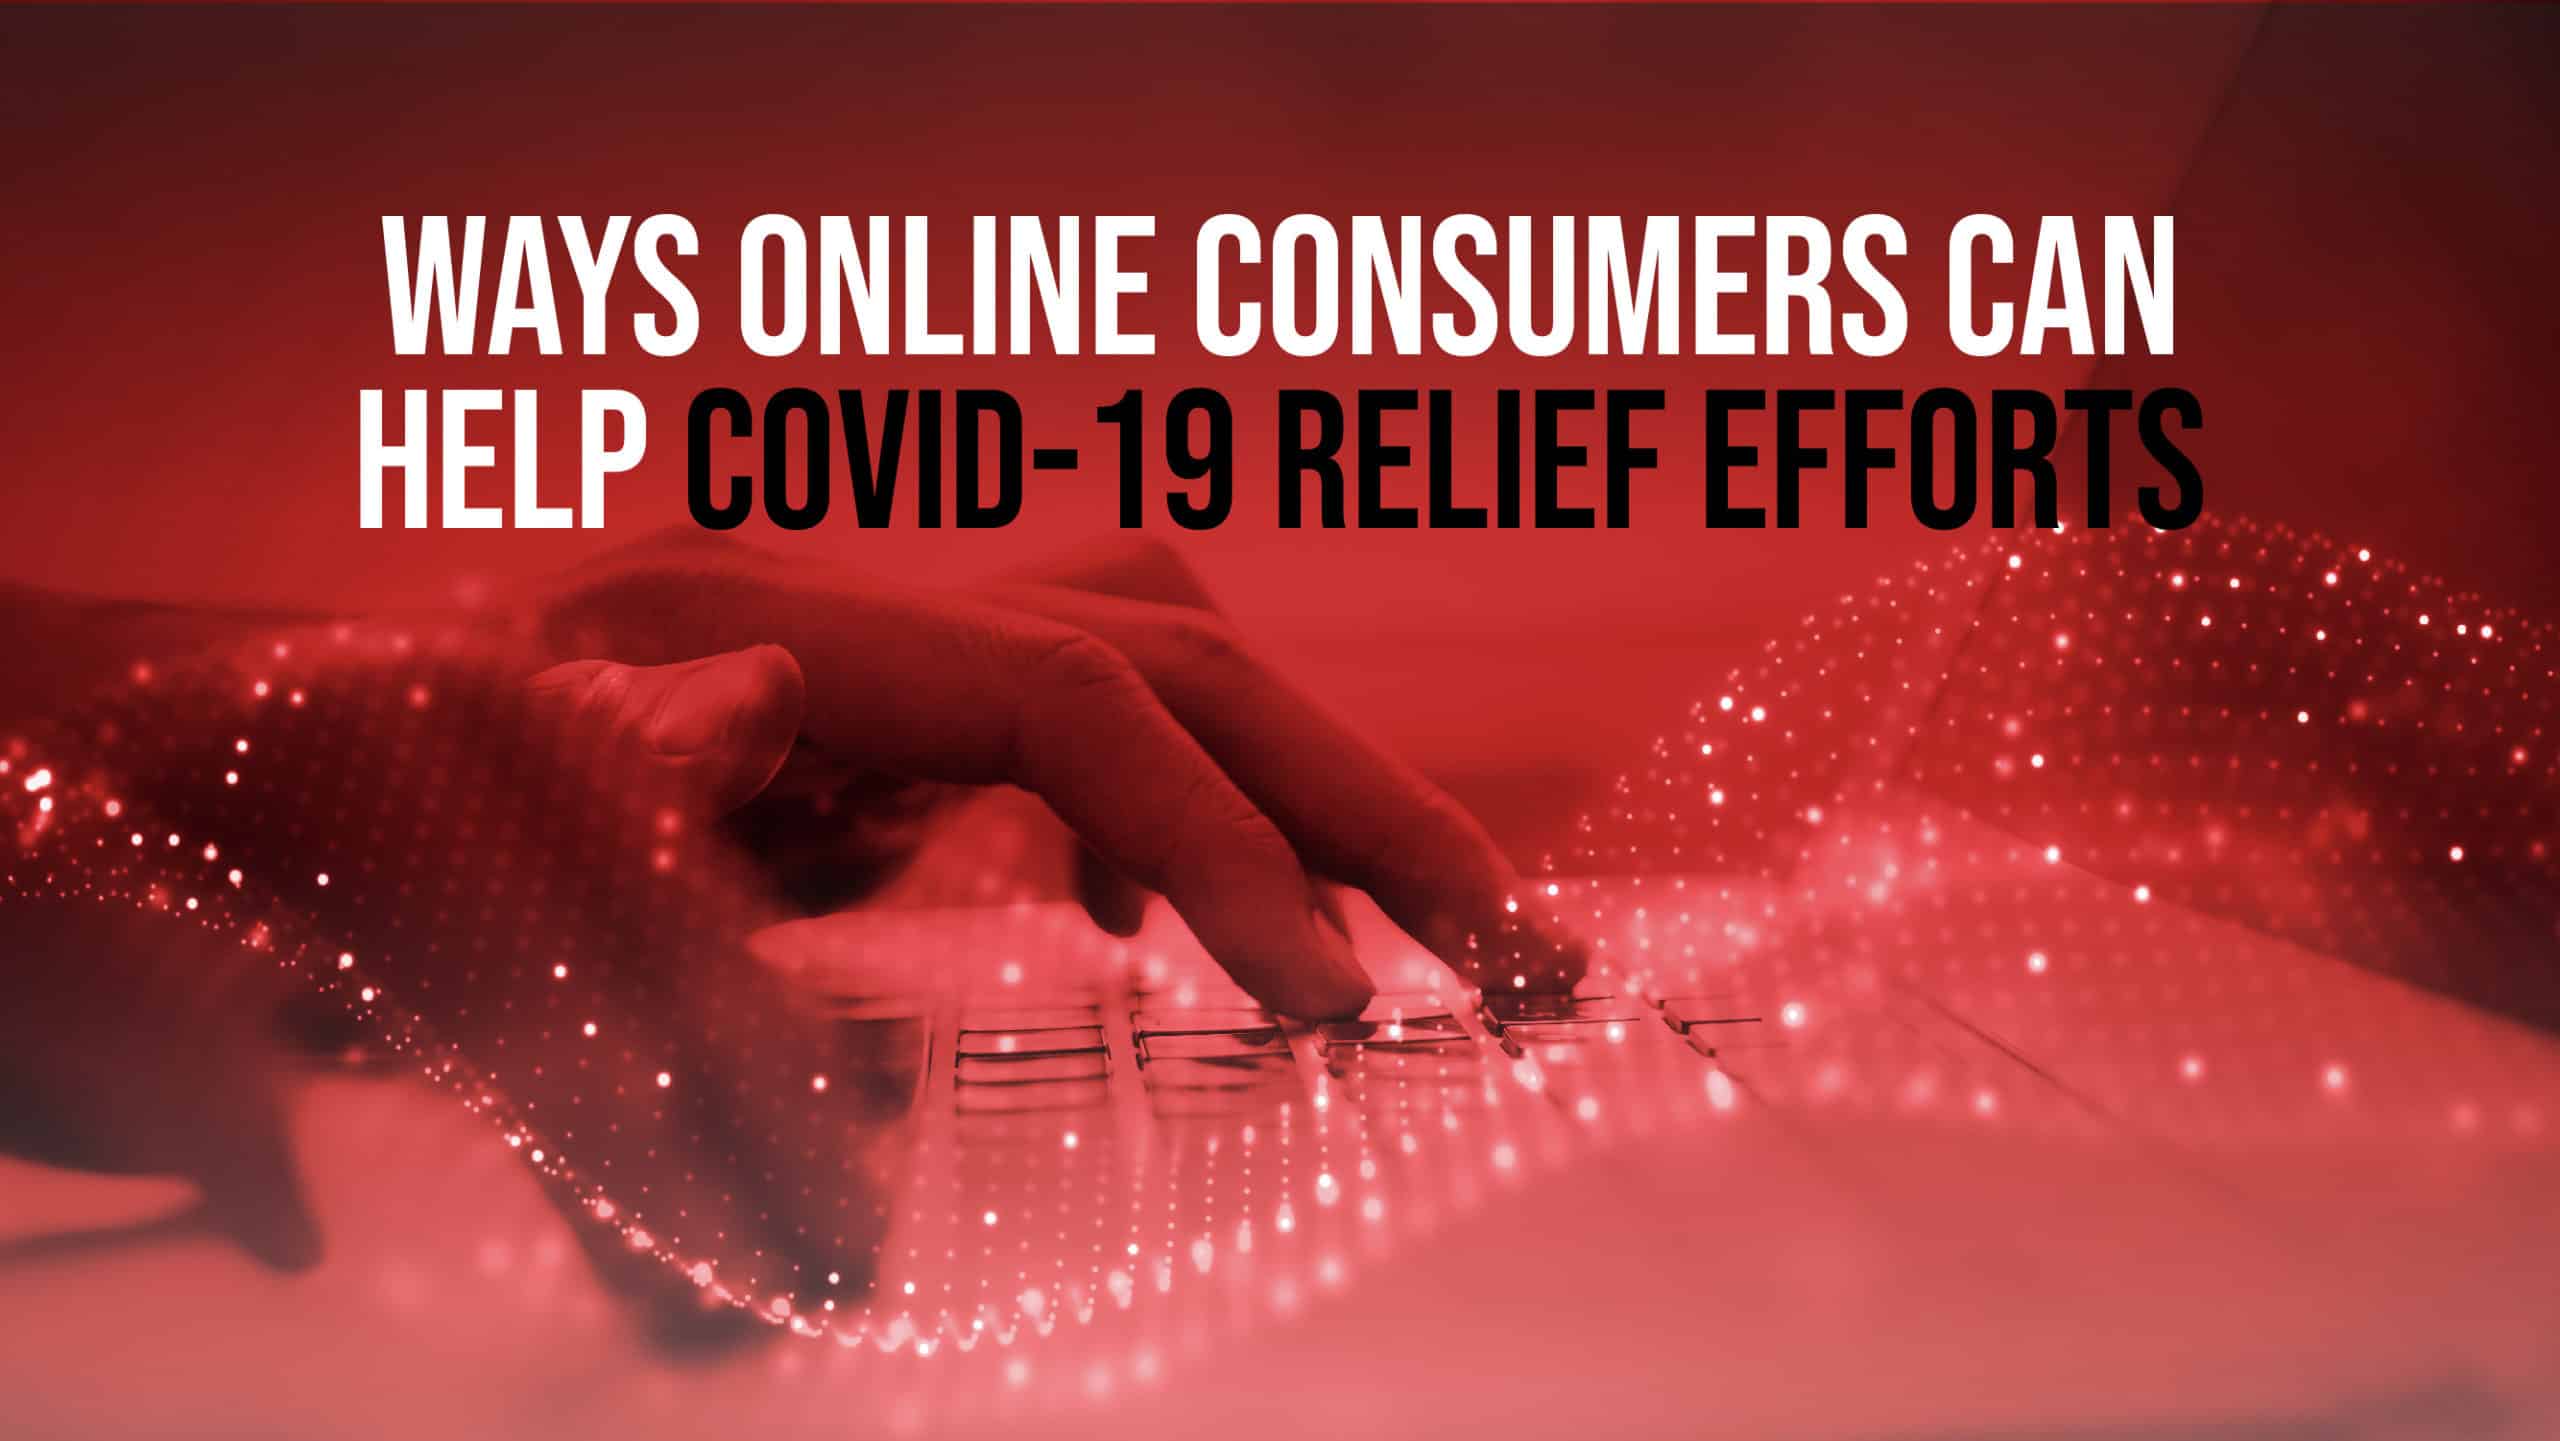 Ways Online Consumers Can Help COVID-19 Relief Efforts featured image